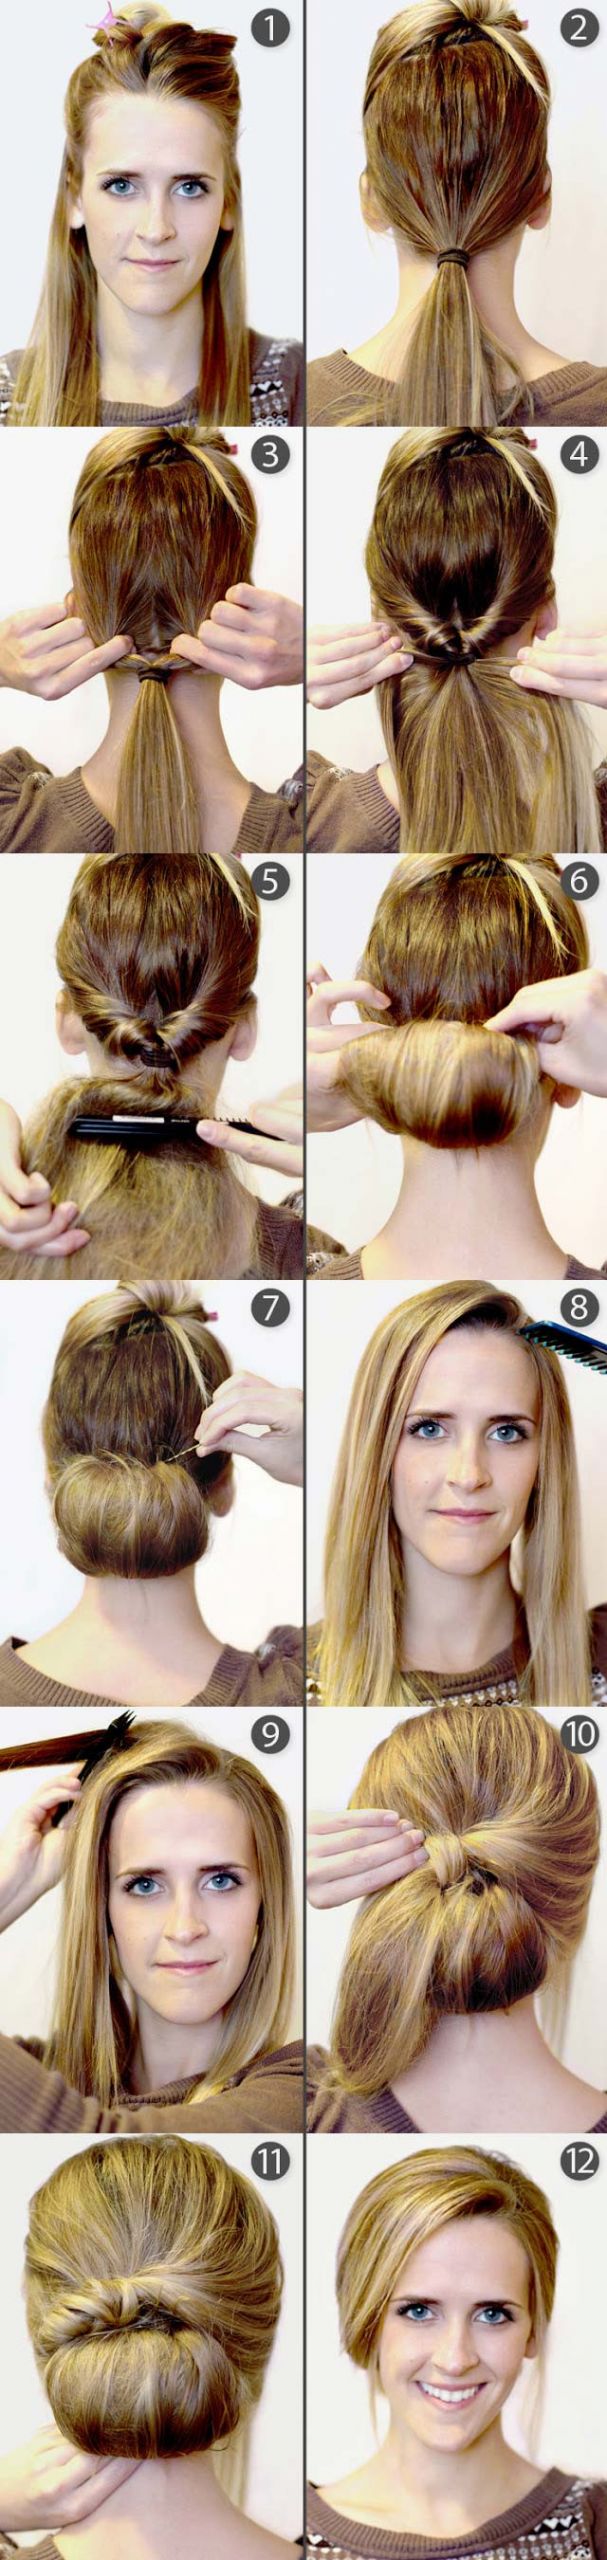 Diy Haircuts For Long Hair
 9 Pretty DIY Hairstyles With Step by Step Tutorials